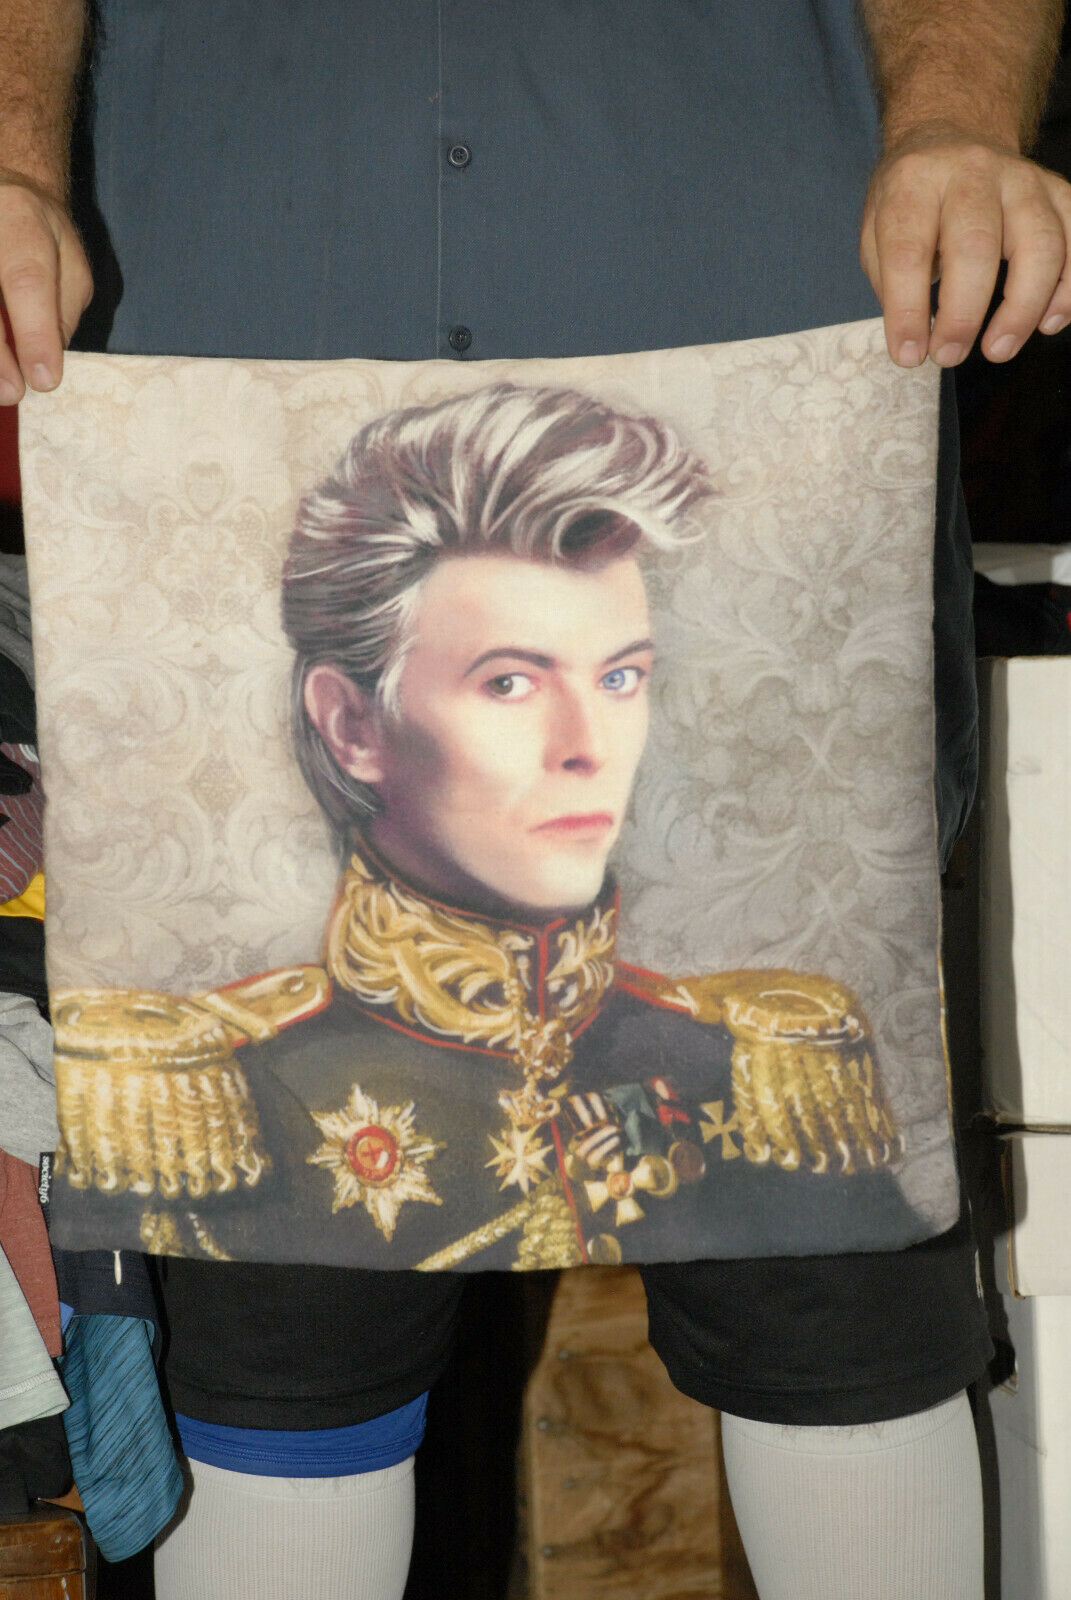 David Bowie Two Sided Pillow Case Amazing Art  Society 6  Brand Near Mint+ Nice